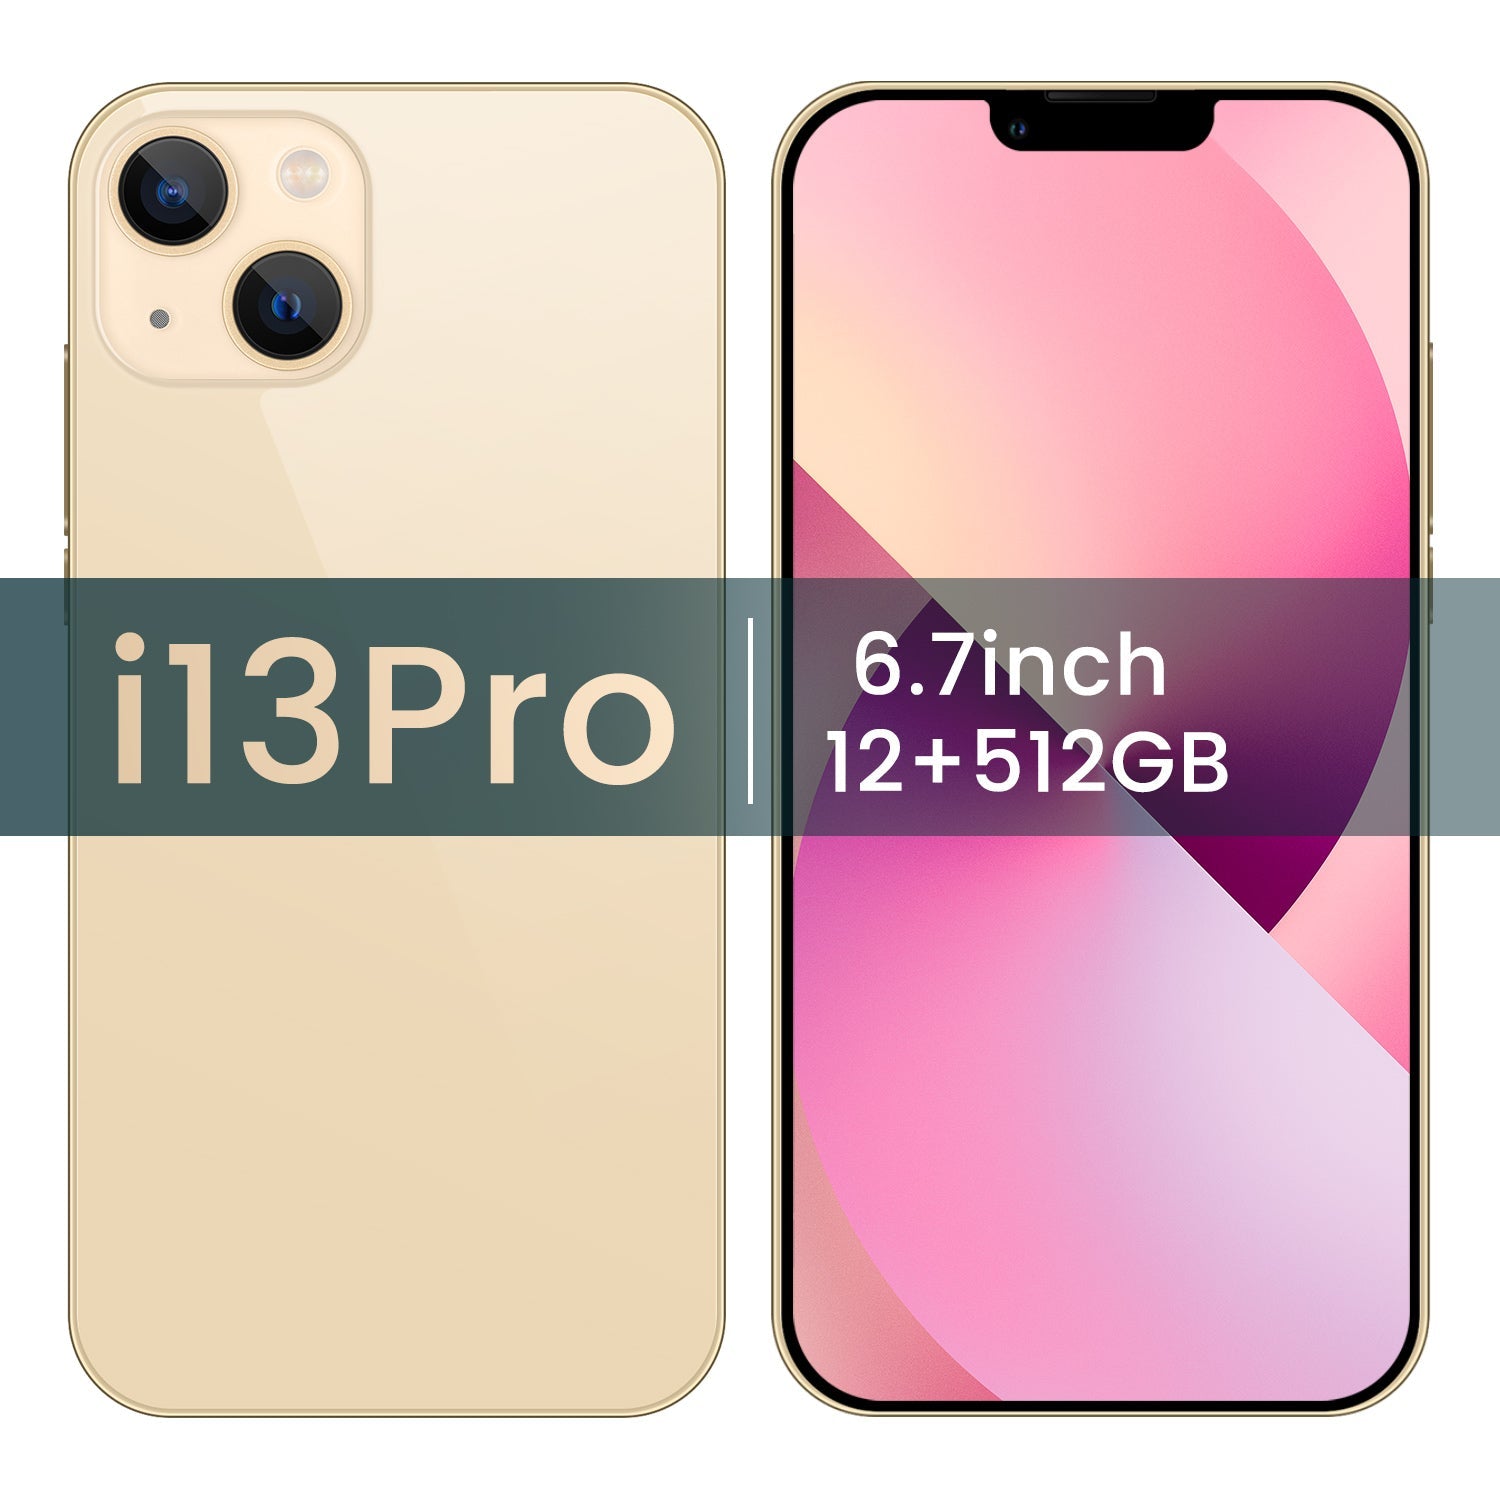 HOT SELLING PHONE13 PRO 12GB+512GB 16MP+32MP 6.7 inch Smartphone Unlocked Smart Cell Mobile Phone baby magazin 